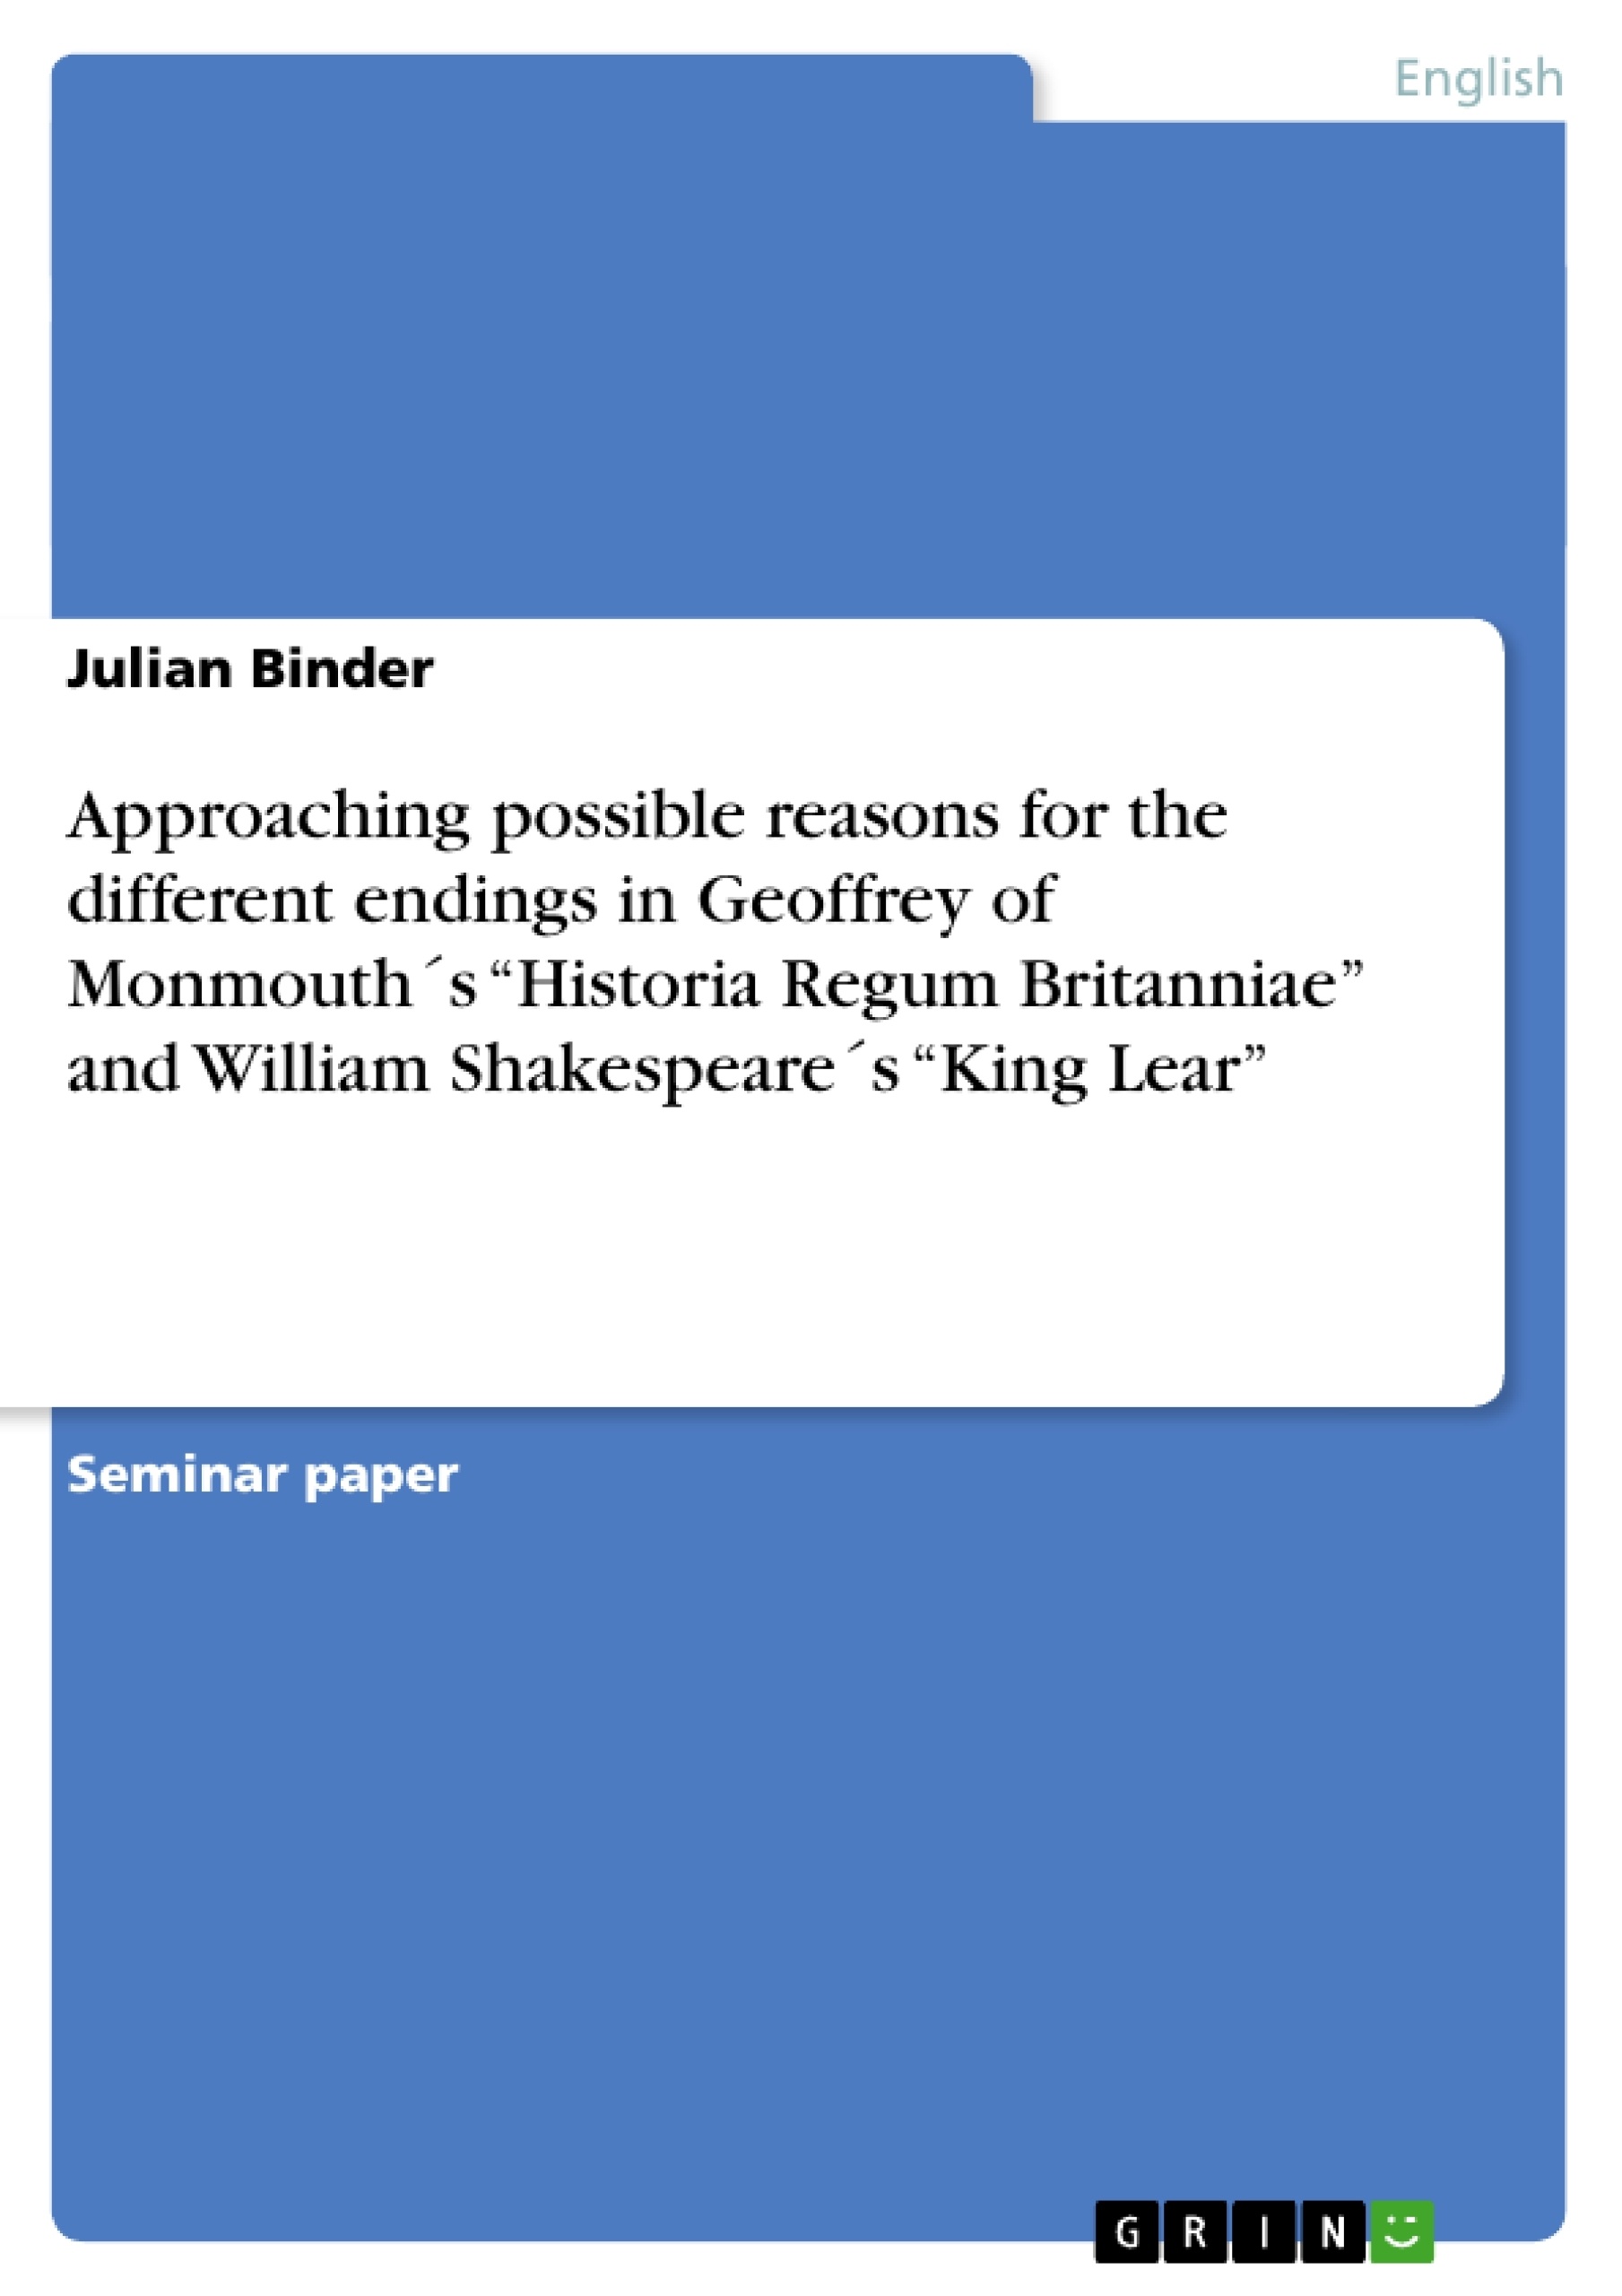 Titre: Approaching possible reasons for the different endings in Geoffrey of Monmouth´s “Historia Regum Britanniae”  and   William Shakespeare´s “King Lear”